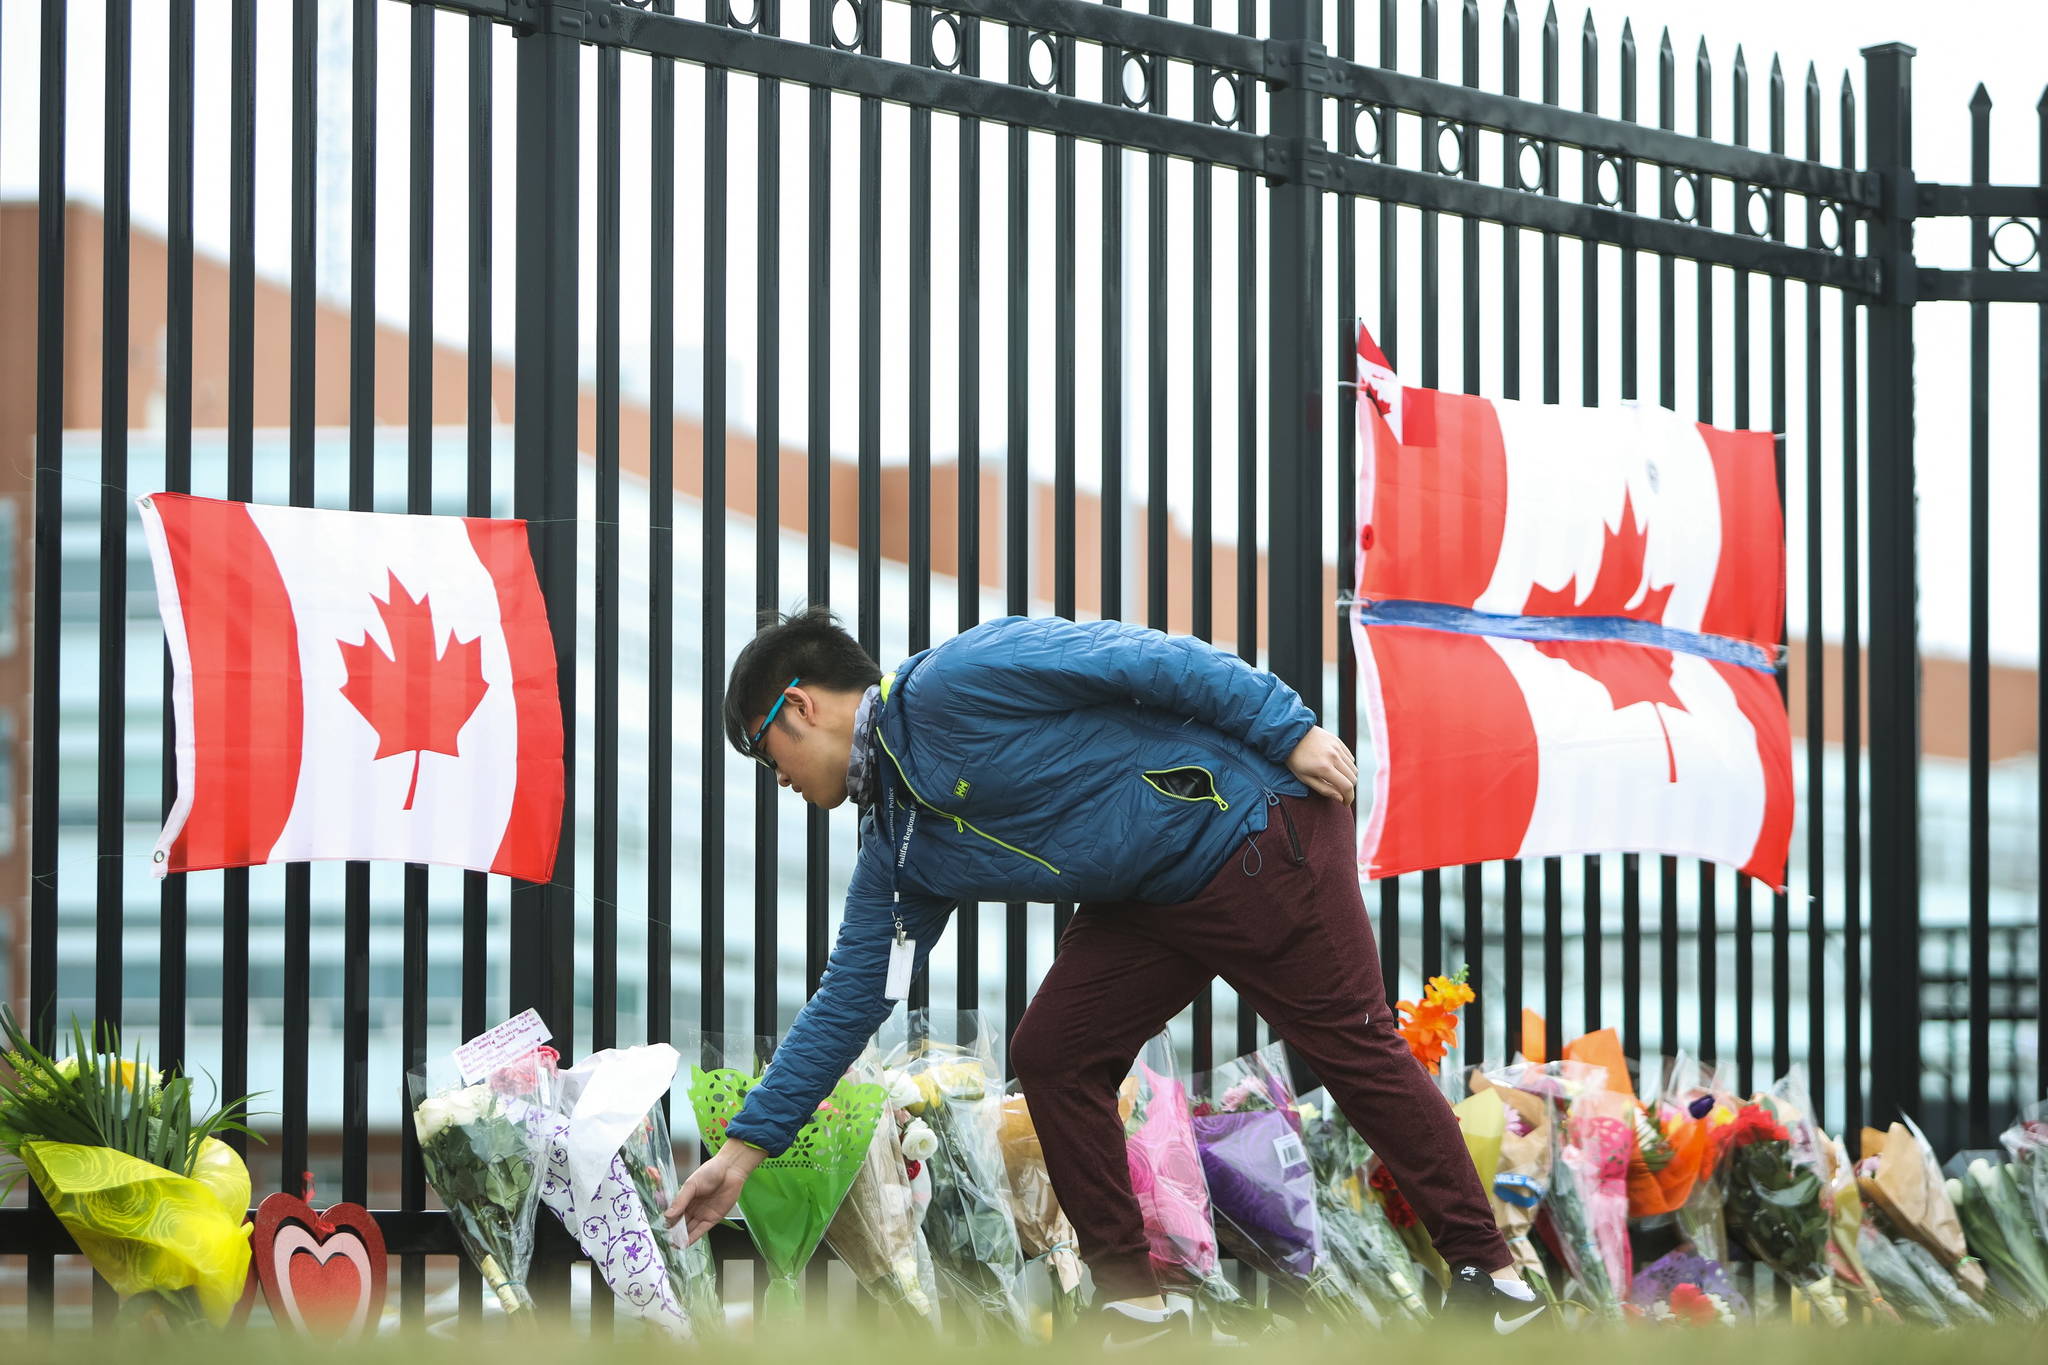 A person leaves flowers at a make-shift memorial dedicated to Constable Heidi Stevenson at RCMP headquarters in Dartmouth, Nova Scotia, Monday, April 20, 2020. Investigators say a killer’s use of a mock police cruiser and an RCMP uniform almost identical to the real thing helped him escape detection as he travelled between 16 crime scenes in a rampage that has left at least 19 dead in Nova Scotia. THE CANADIAN PRESS/Riley Smith